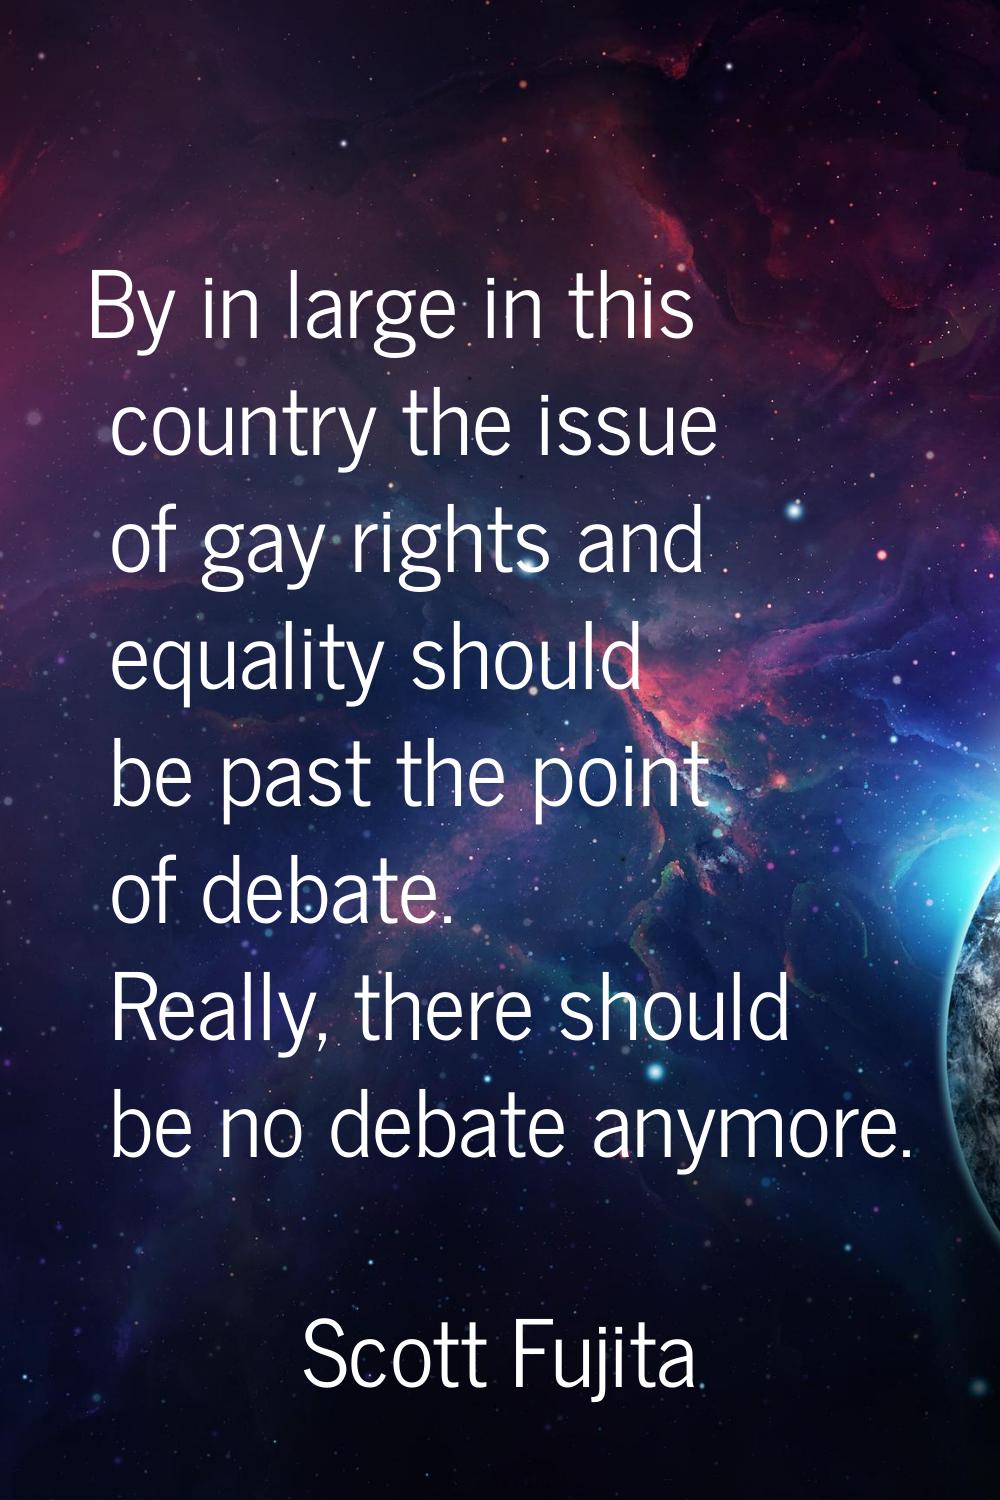 By in large in this country the issue of gay rights and equality should be past the point of debate